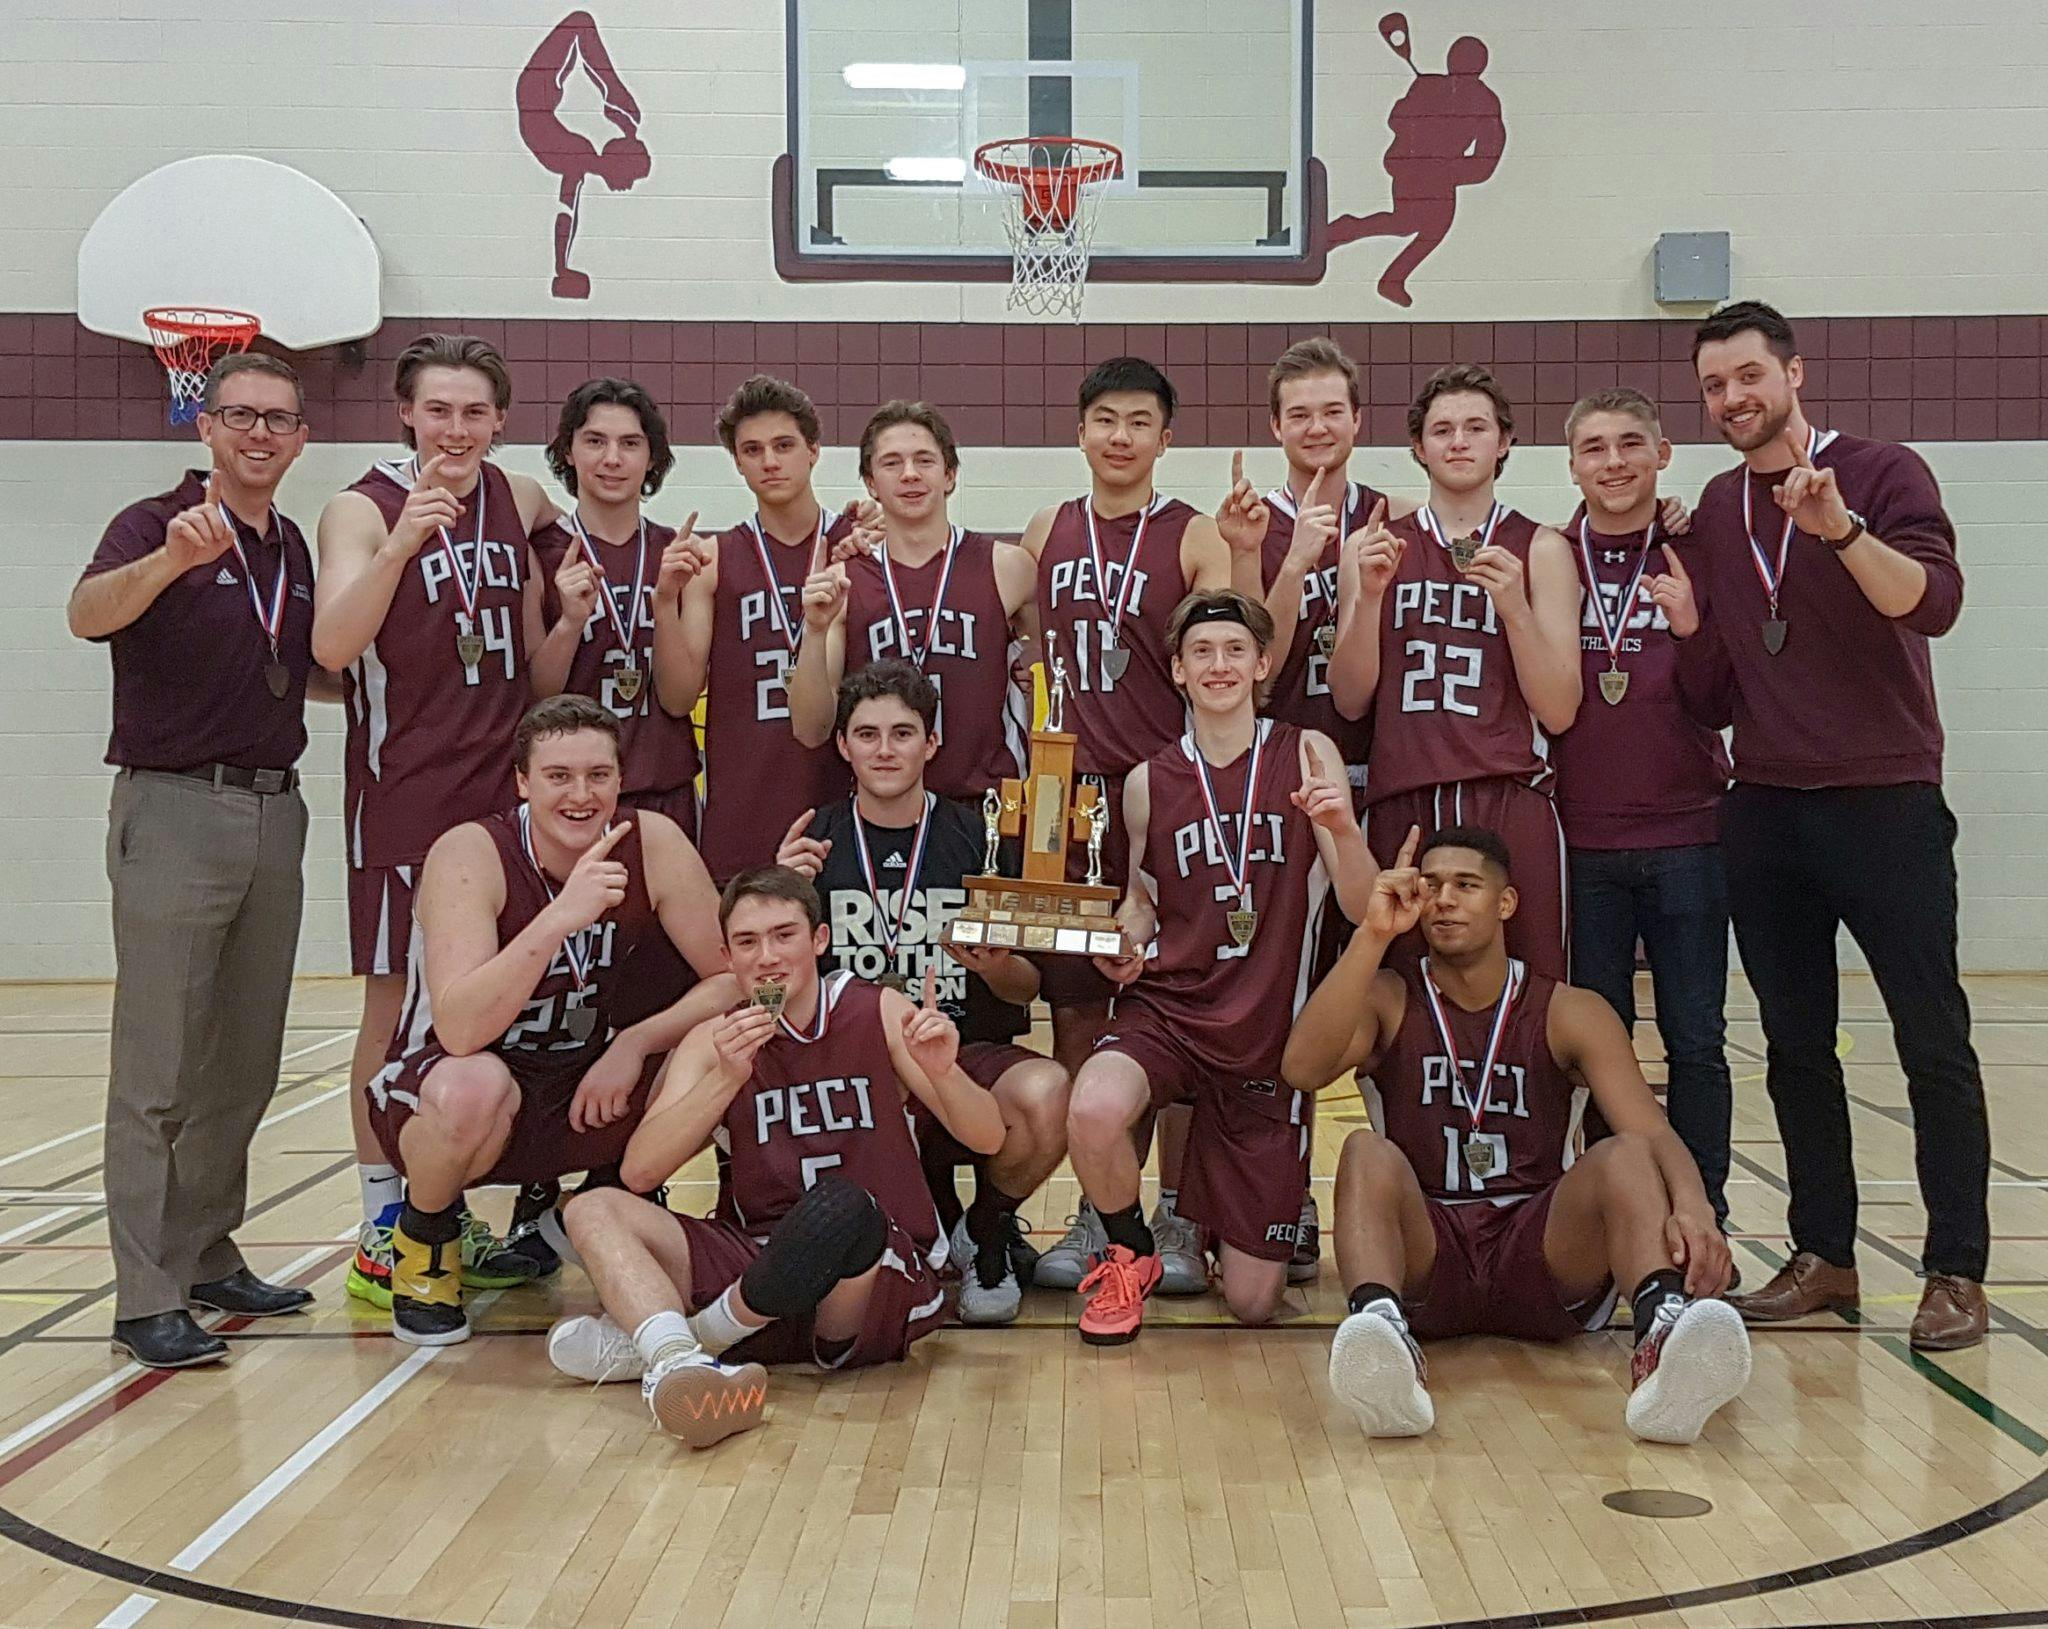 <p>Champions &#8211; The PECI Senior Basketball Panthers made school history with their COSSA gold-medal win Friday .   Pictured are (front row, from left) Brodie Byford, Dylan Morrow, Jack MacCool, Devon Wilton, Alex Arsenault, (back row, from left) coach Rob Garden, Logan Stark, Joe Burley, Ian Forsyth, Thomas Davies, Owen Wang, Ben Clarke, Justin Smith, Gabe Goad,  coachTaylor Reddick (coach). Not pictured are Kaleb Stacey and coach Caleb Hugh. (Submitted photo)</p>
